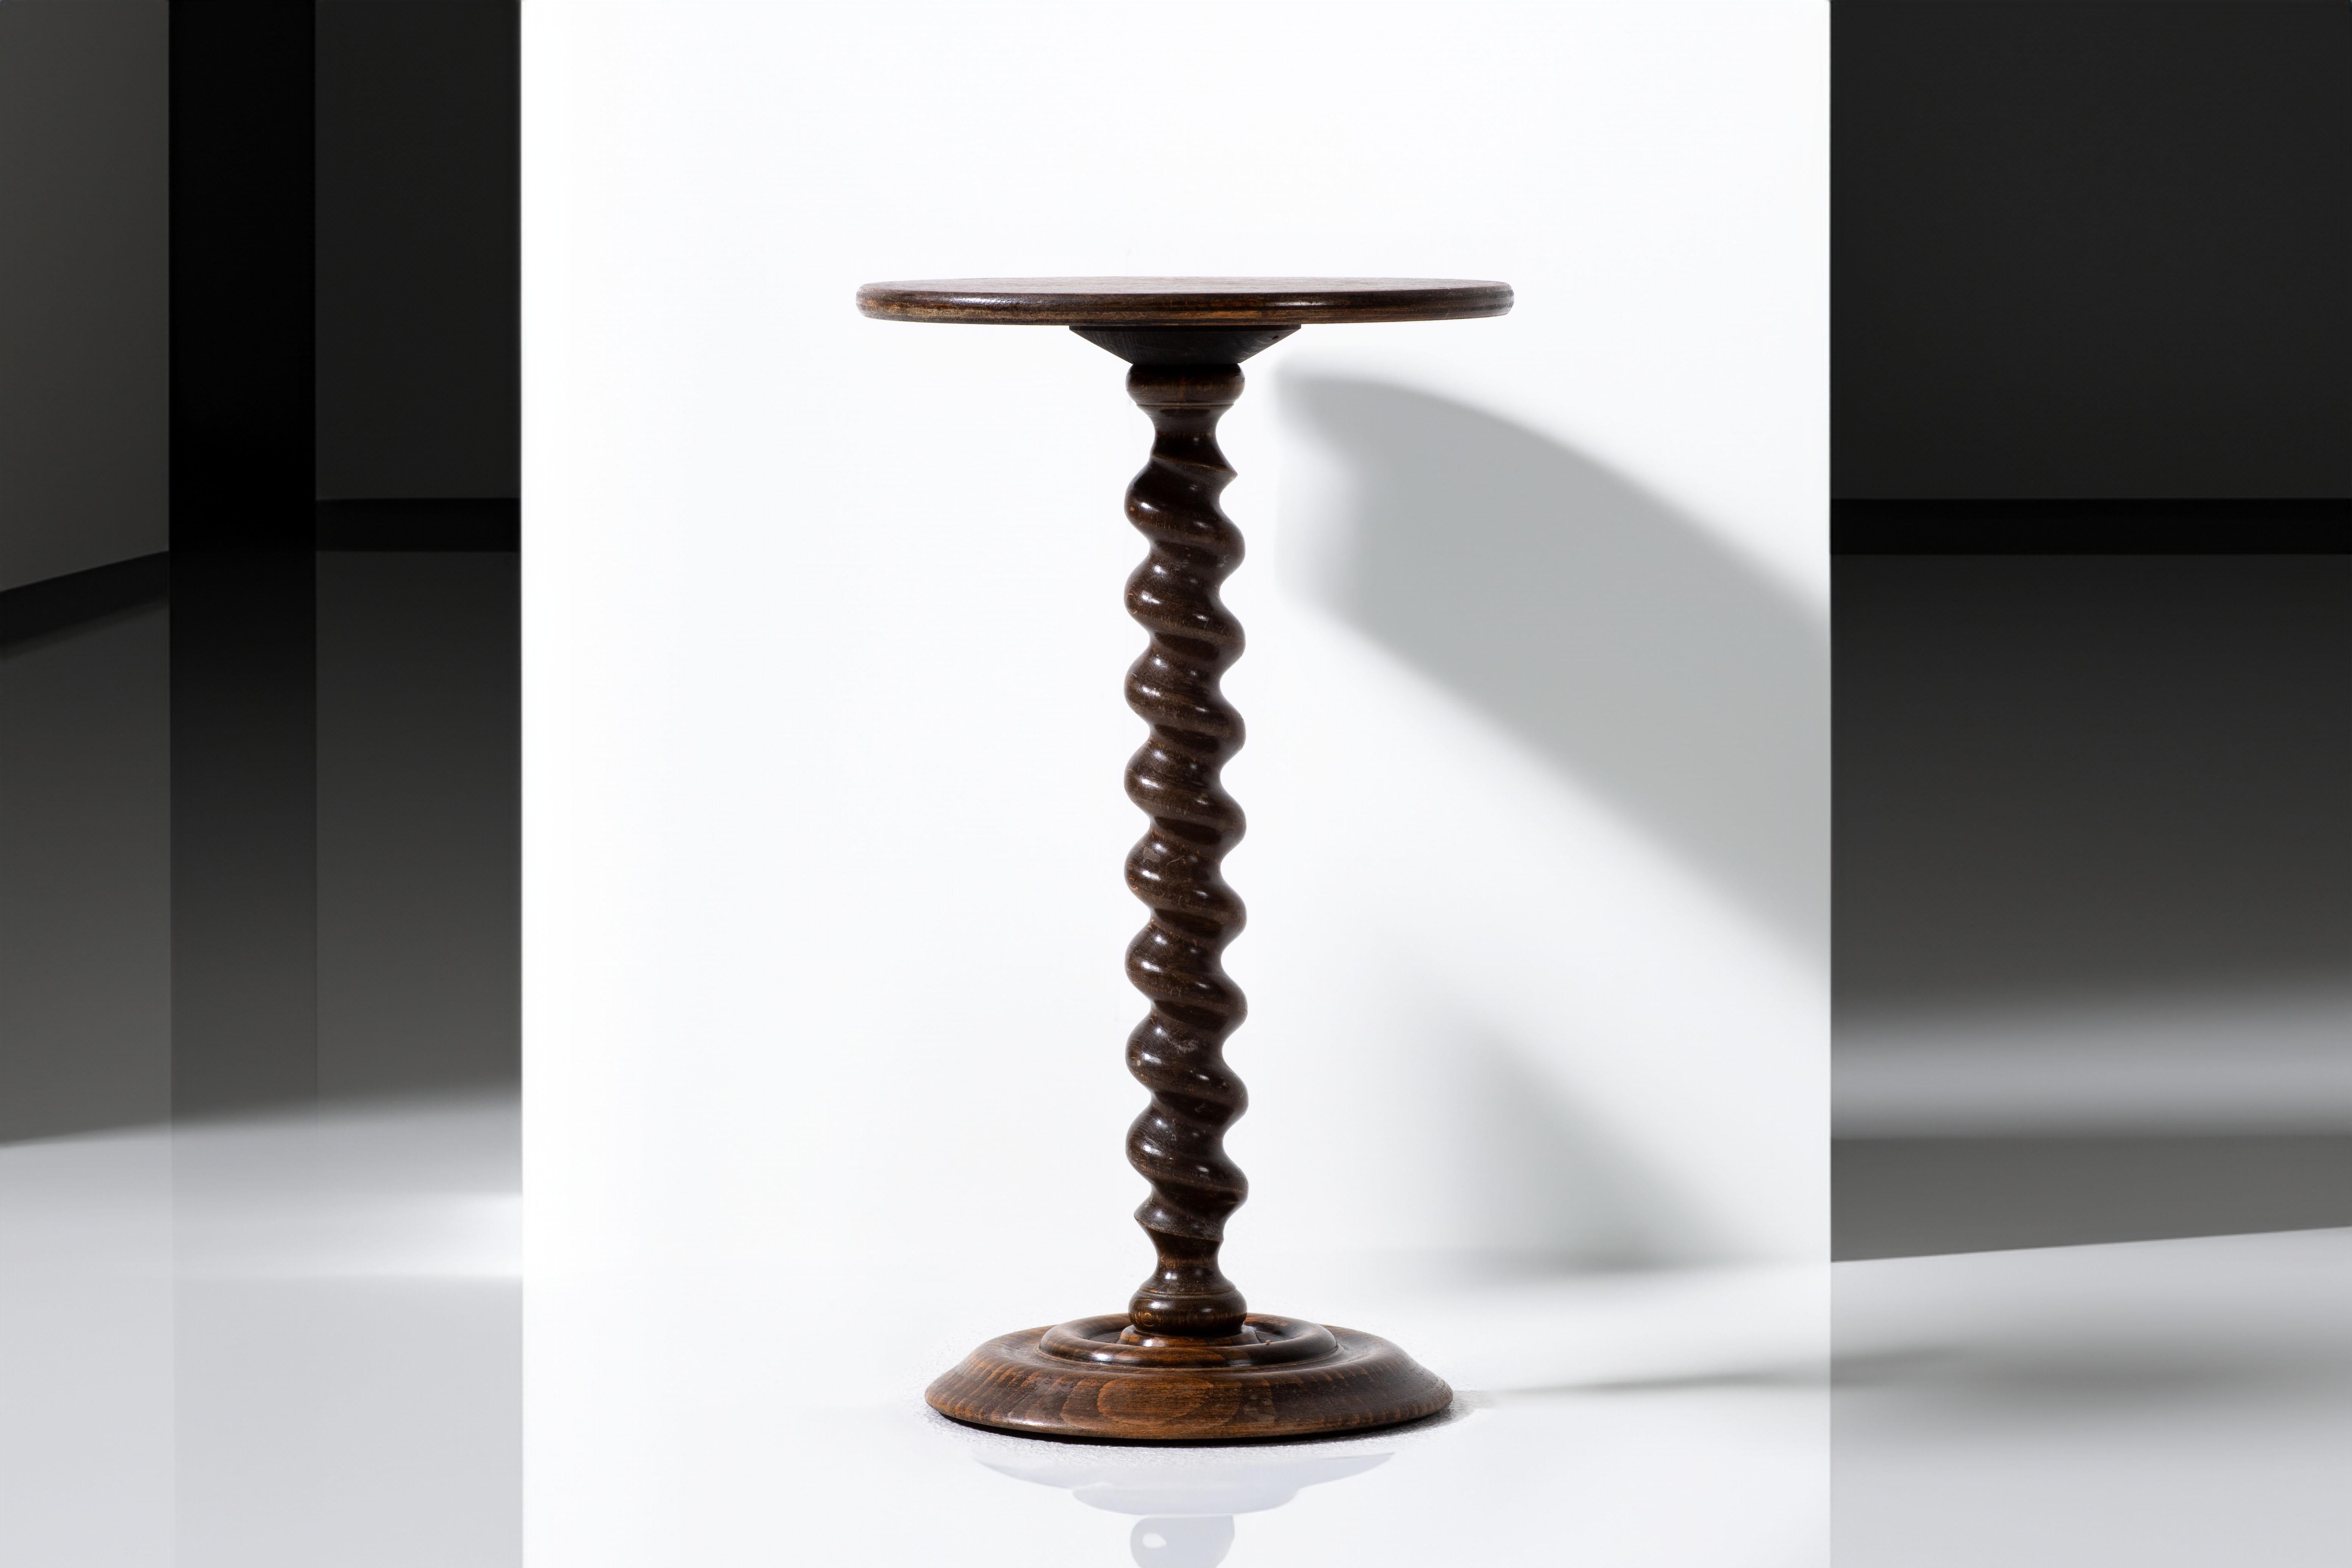 Introducing a delightful French vintage end table or gueridon, inspired by the unmistakable style of renowned designer Charles Dudouyt. This charming piece showcases a signature wine press screw leg design, expertly crafted from oak, paying homage